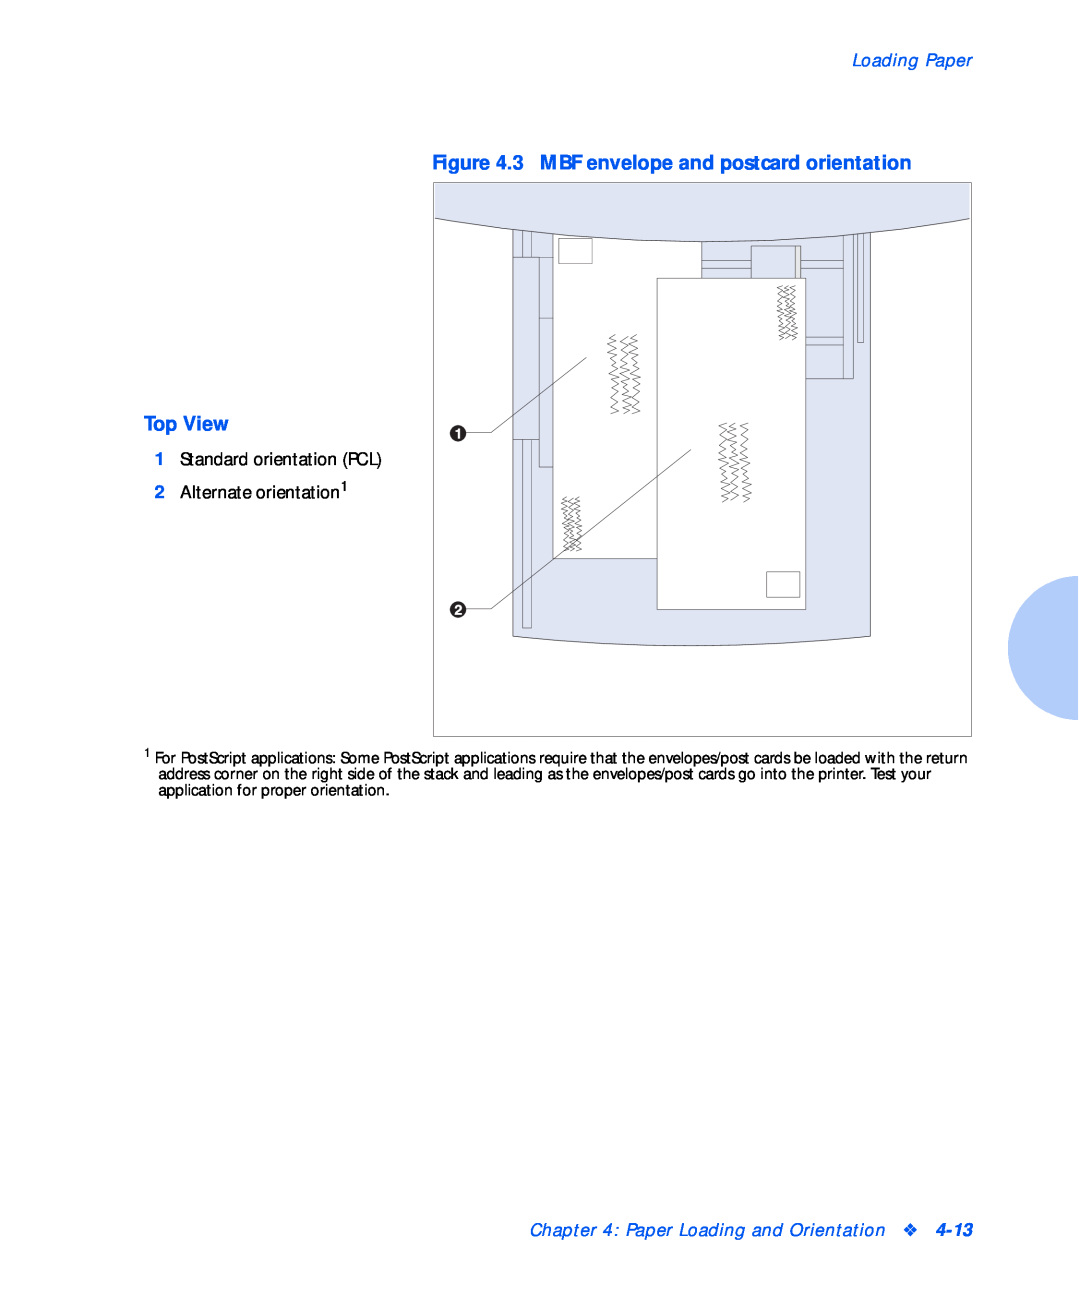 Xerox N17b manual 3 MBF envelope and postcard orientation, Top View, Loading Paper, Paper Loading and Orientation 